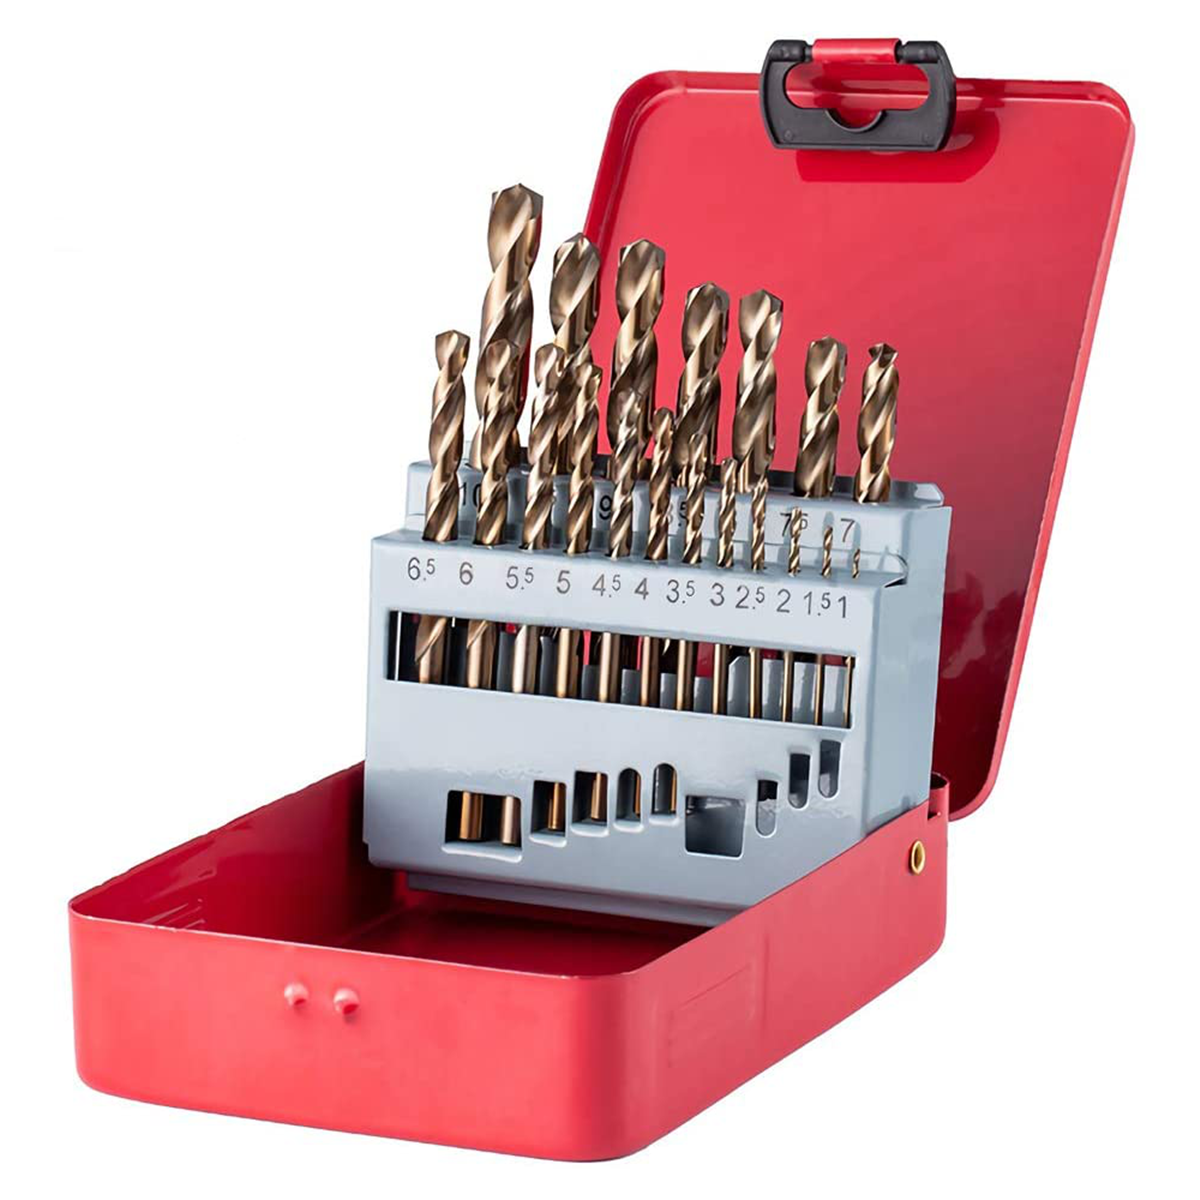 Find 13/19/25 PCS HSS 1-13mm Drillpro M35 Bit Set Cobalt Twist Drill Bit for Sale on Gipsybee.com with cryptocurrencies